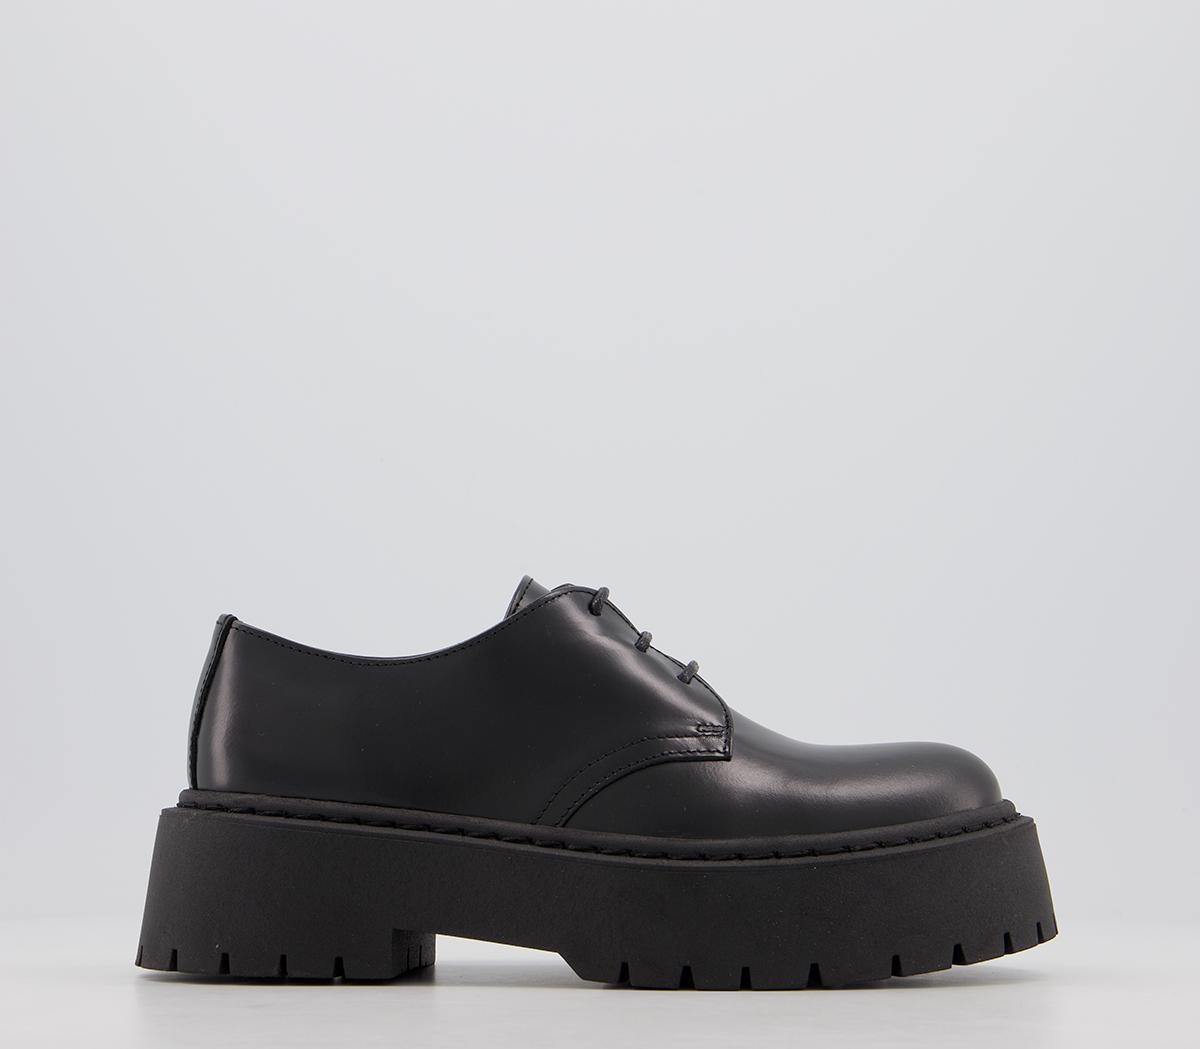 OFFICEFreeing Chunky Lace Up ShoesBlack Leather